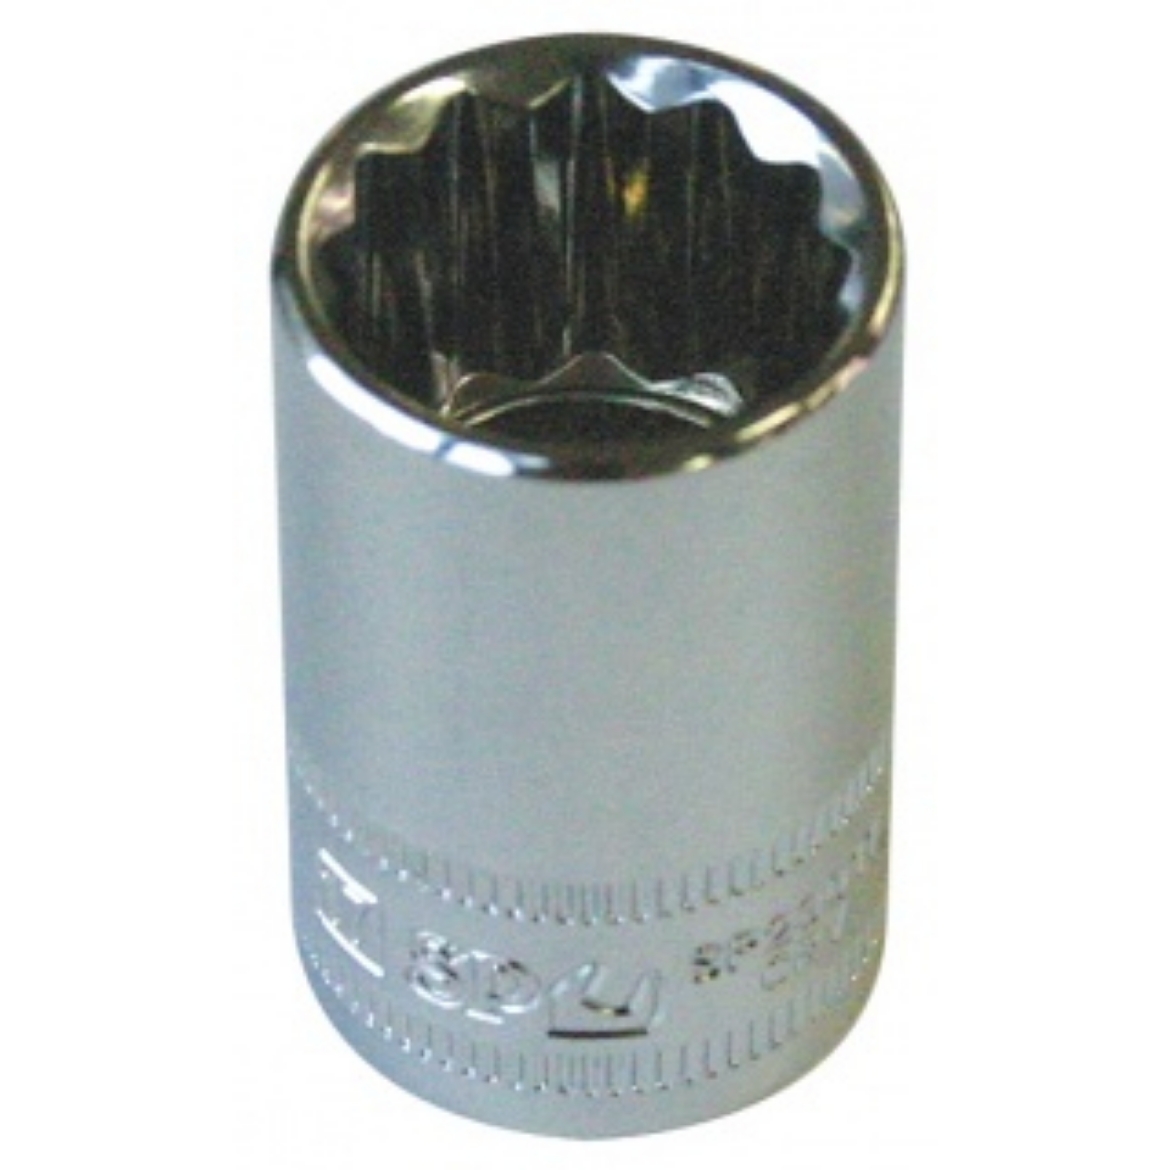 Picture of SOCKET 1/2"DR 12PT METRIC 13MM SP TOOLS